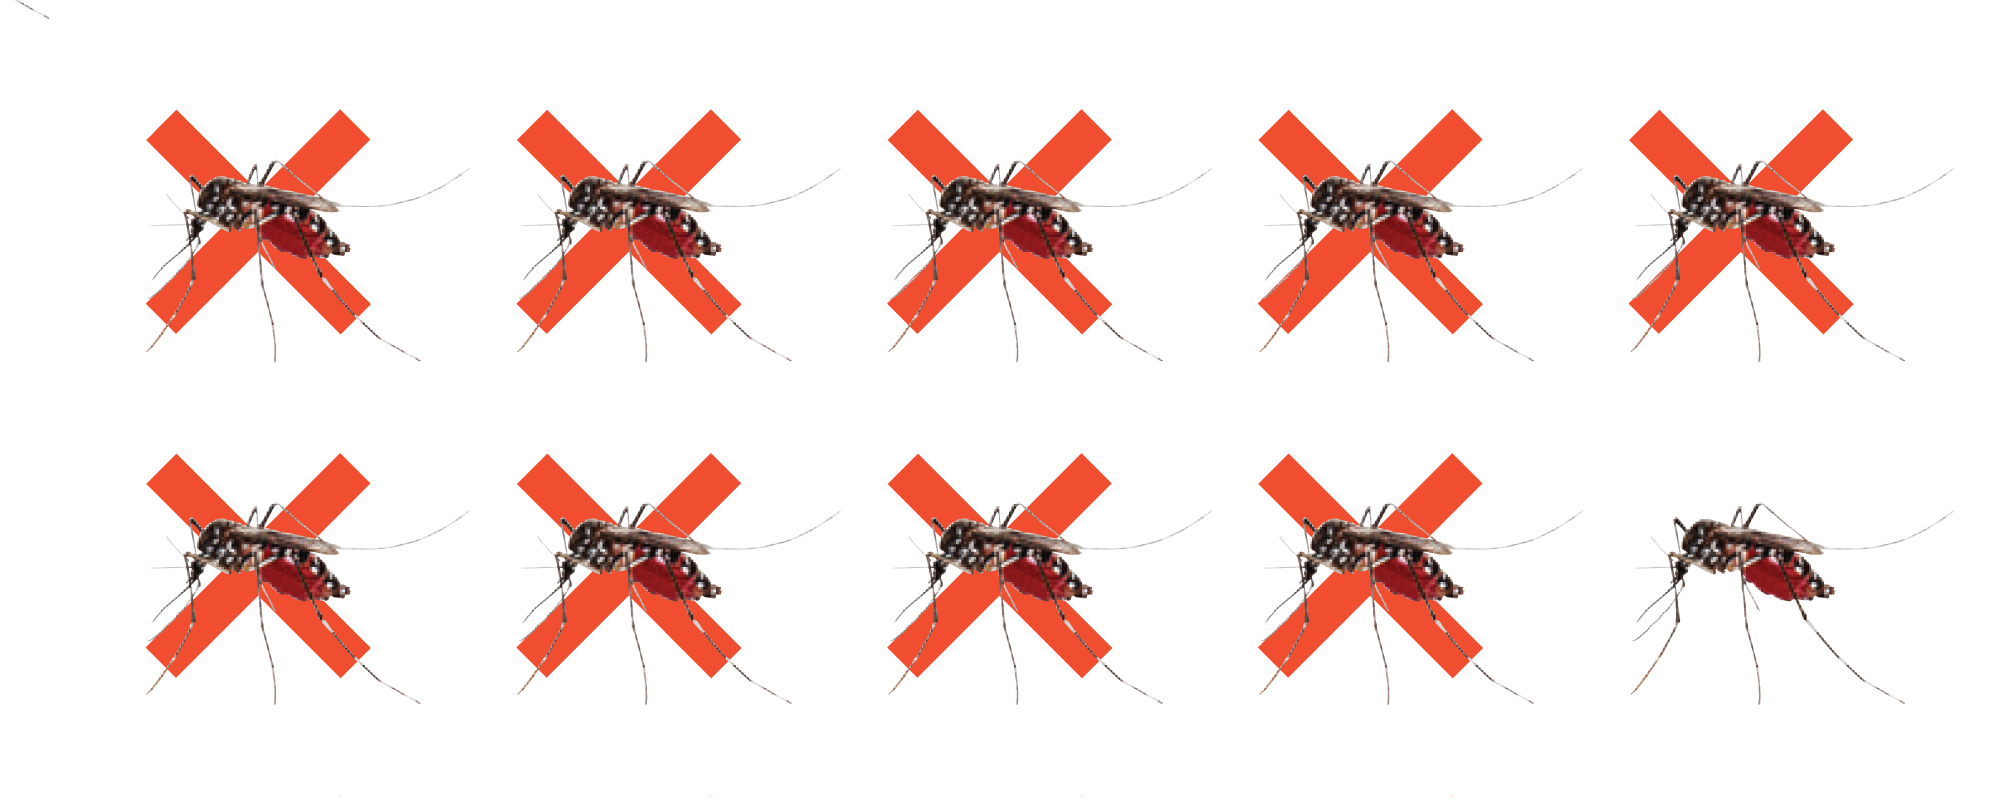 These Mosquitoes Are Designed To Self-Destruct